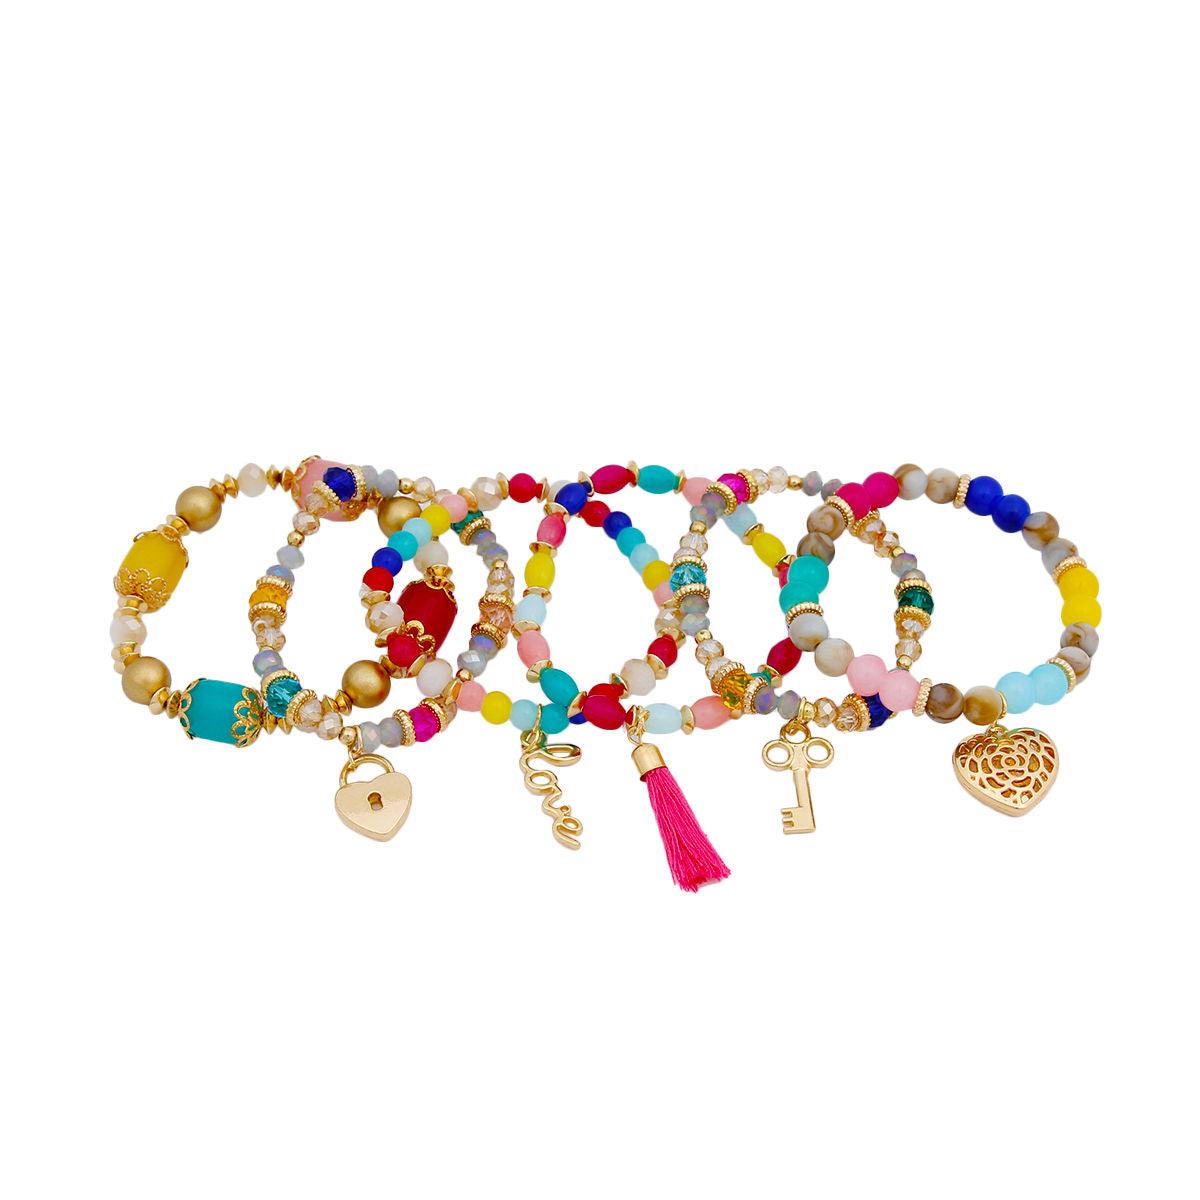 Rainbow Beaded Bracelets with Gold Finish Charms - Perfect for Any Occasion - Shop Now!